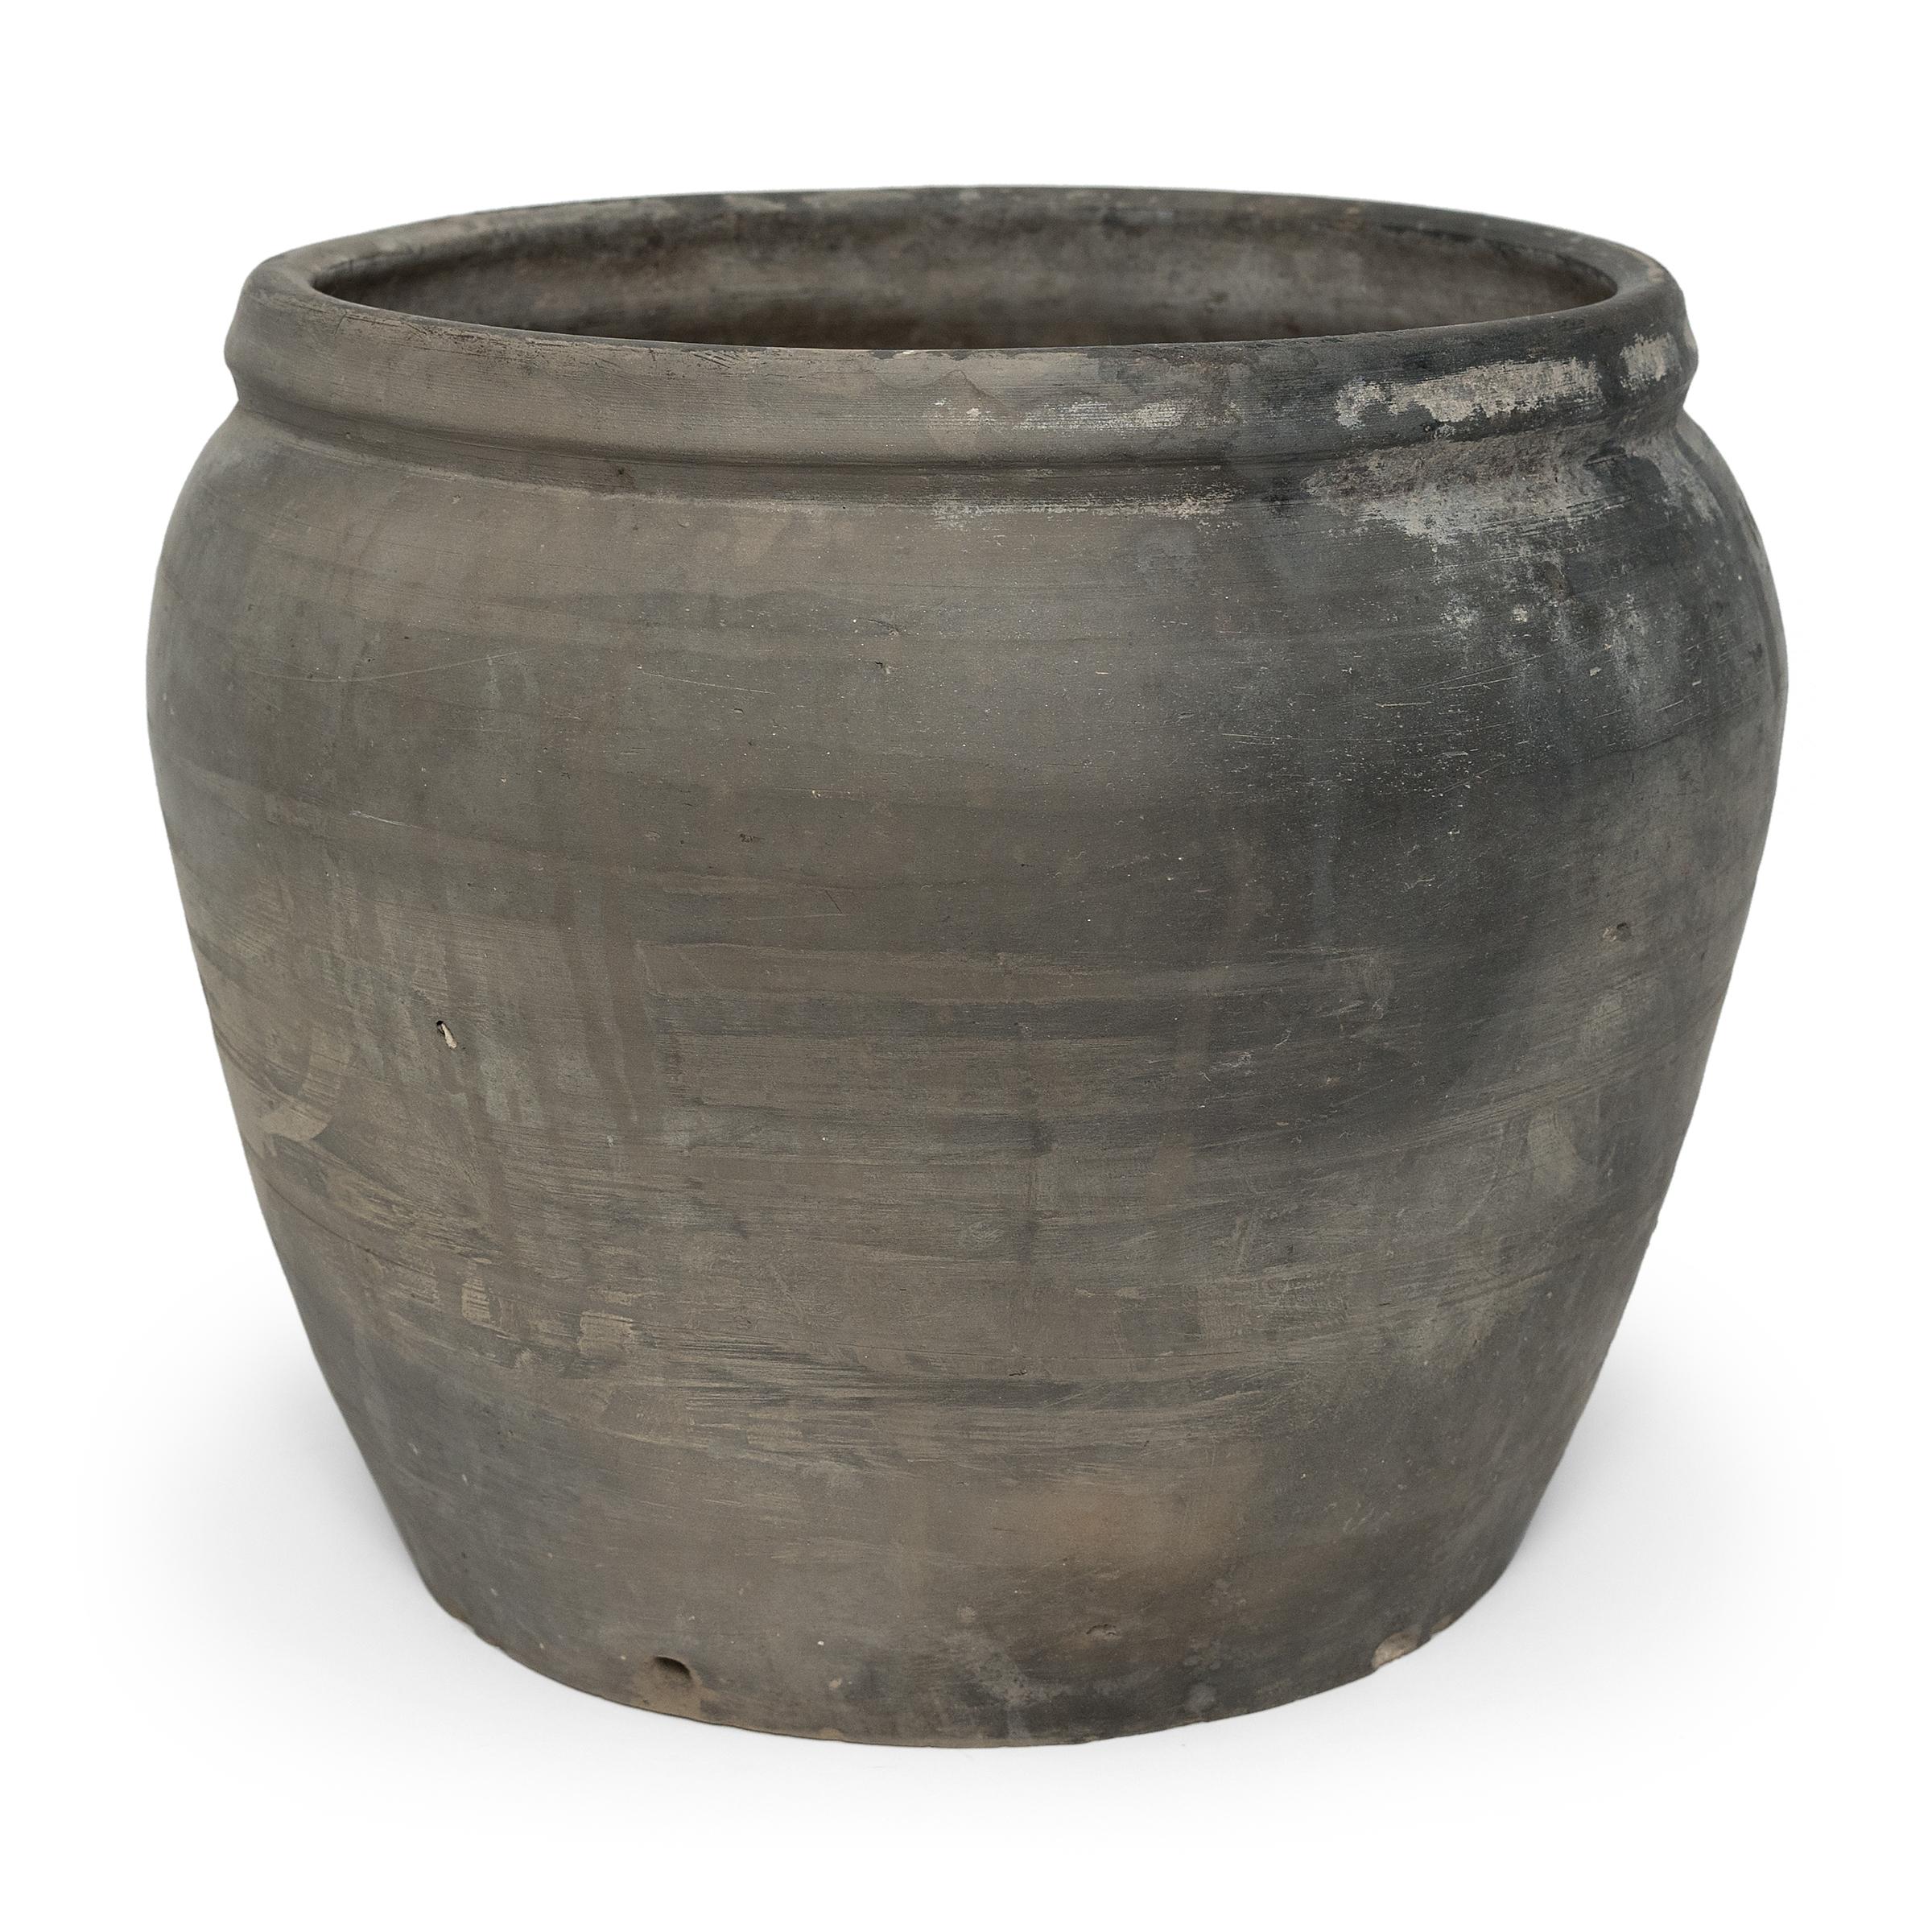 Sculpted during the early 20th century in China's Shanxi province, this vessel has a smoky grey-black exterior with balanced proportions and a beautifully irregular unglazed surface. Charged with the humble task of storing dry goods, this